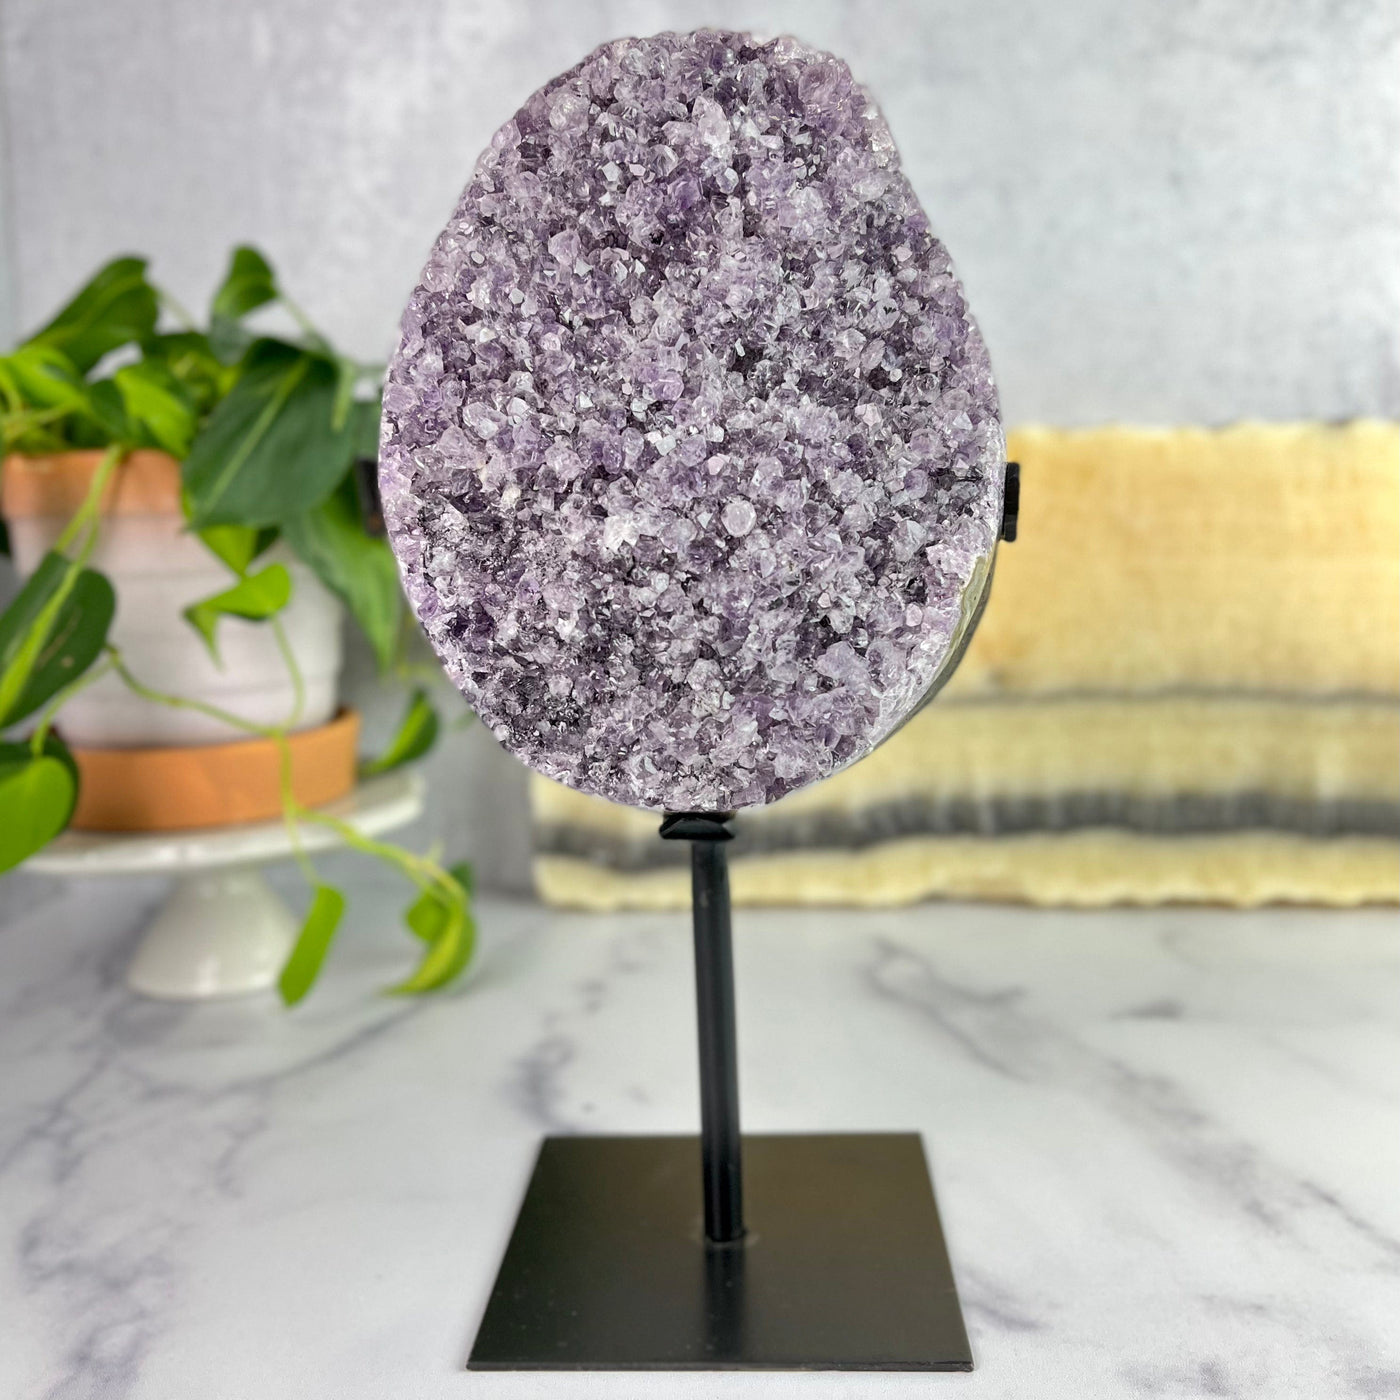 Frontal view of Oval Amethyst Crystal Cluster on Metal Stand